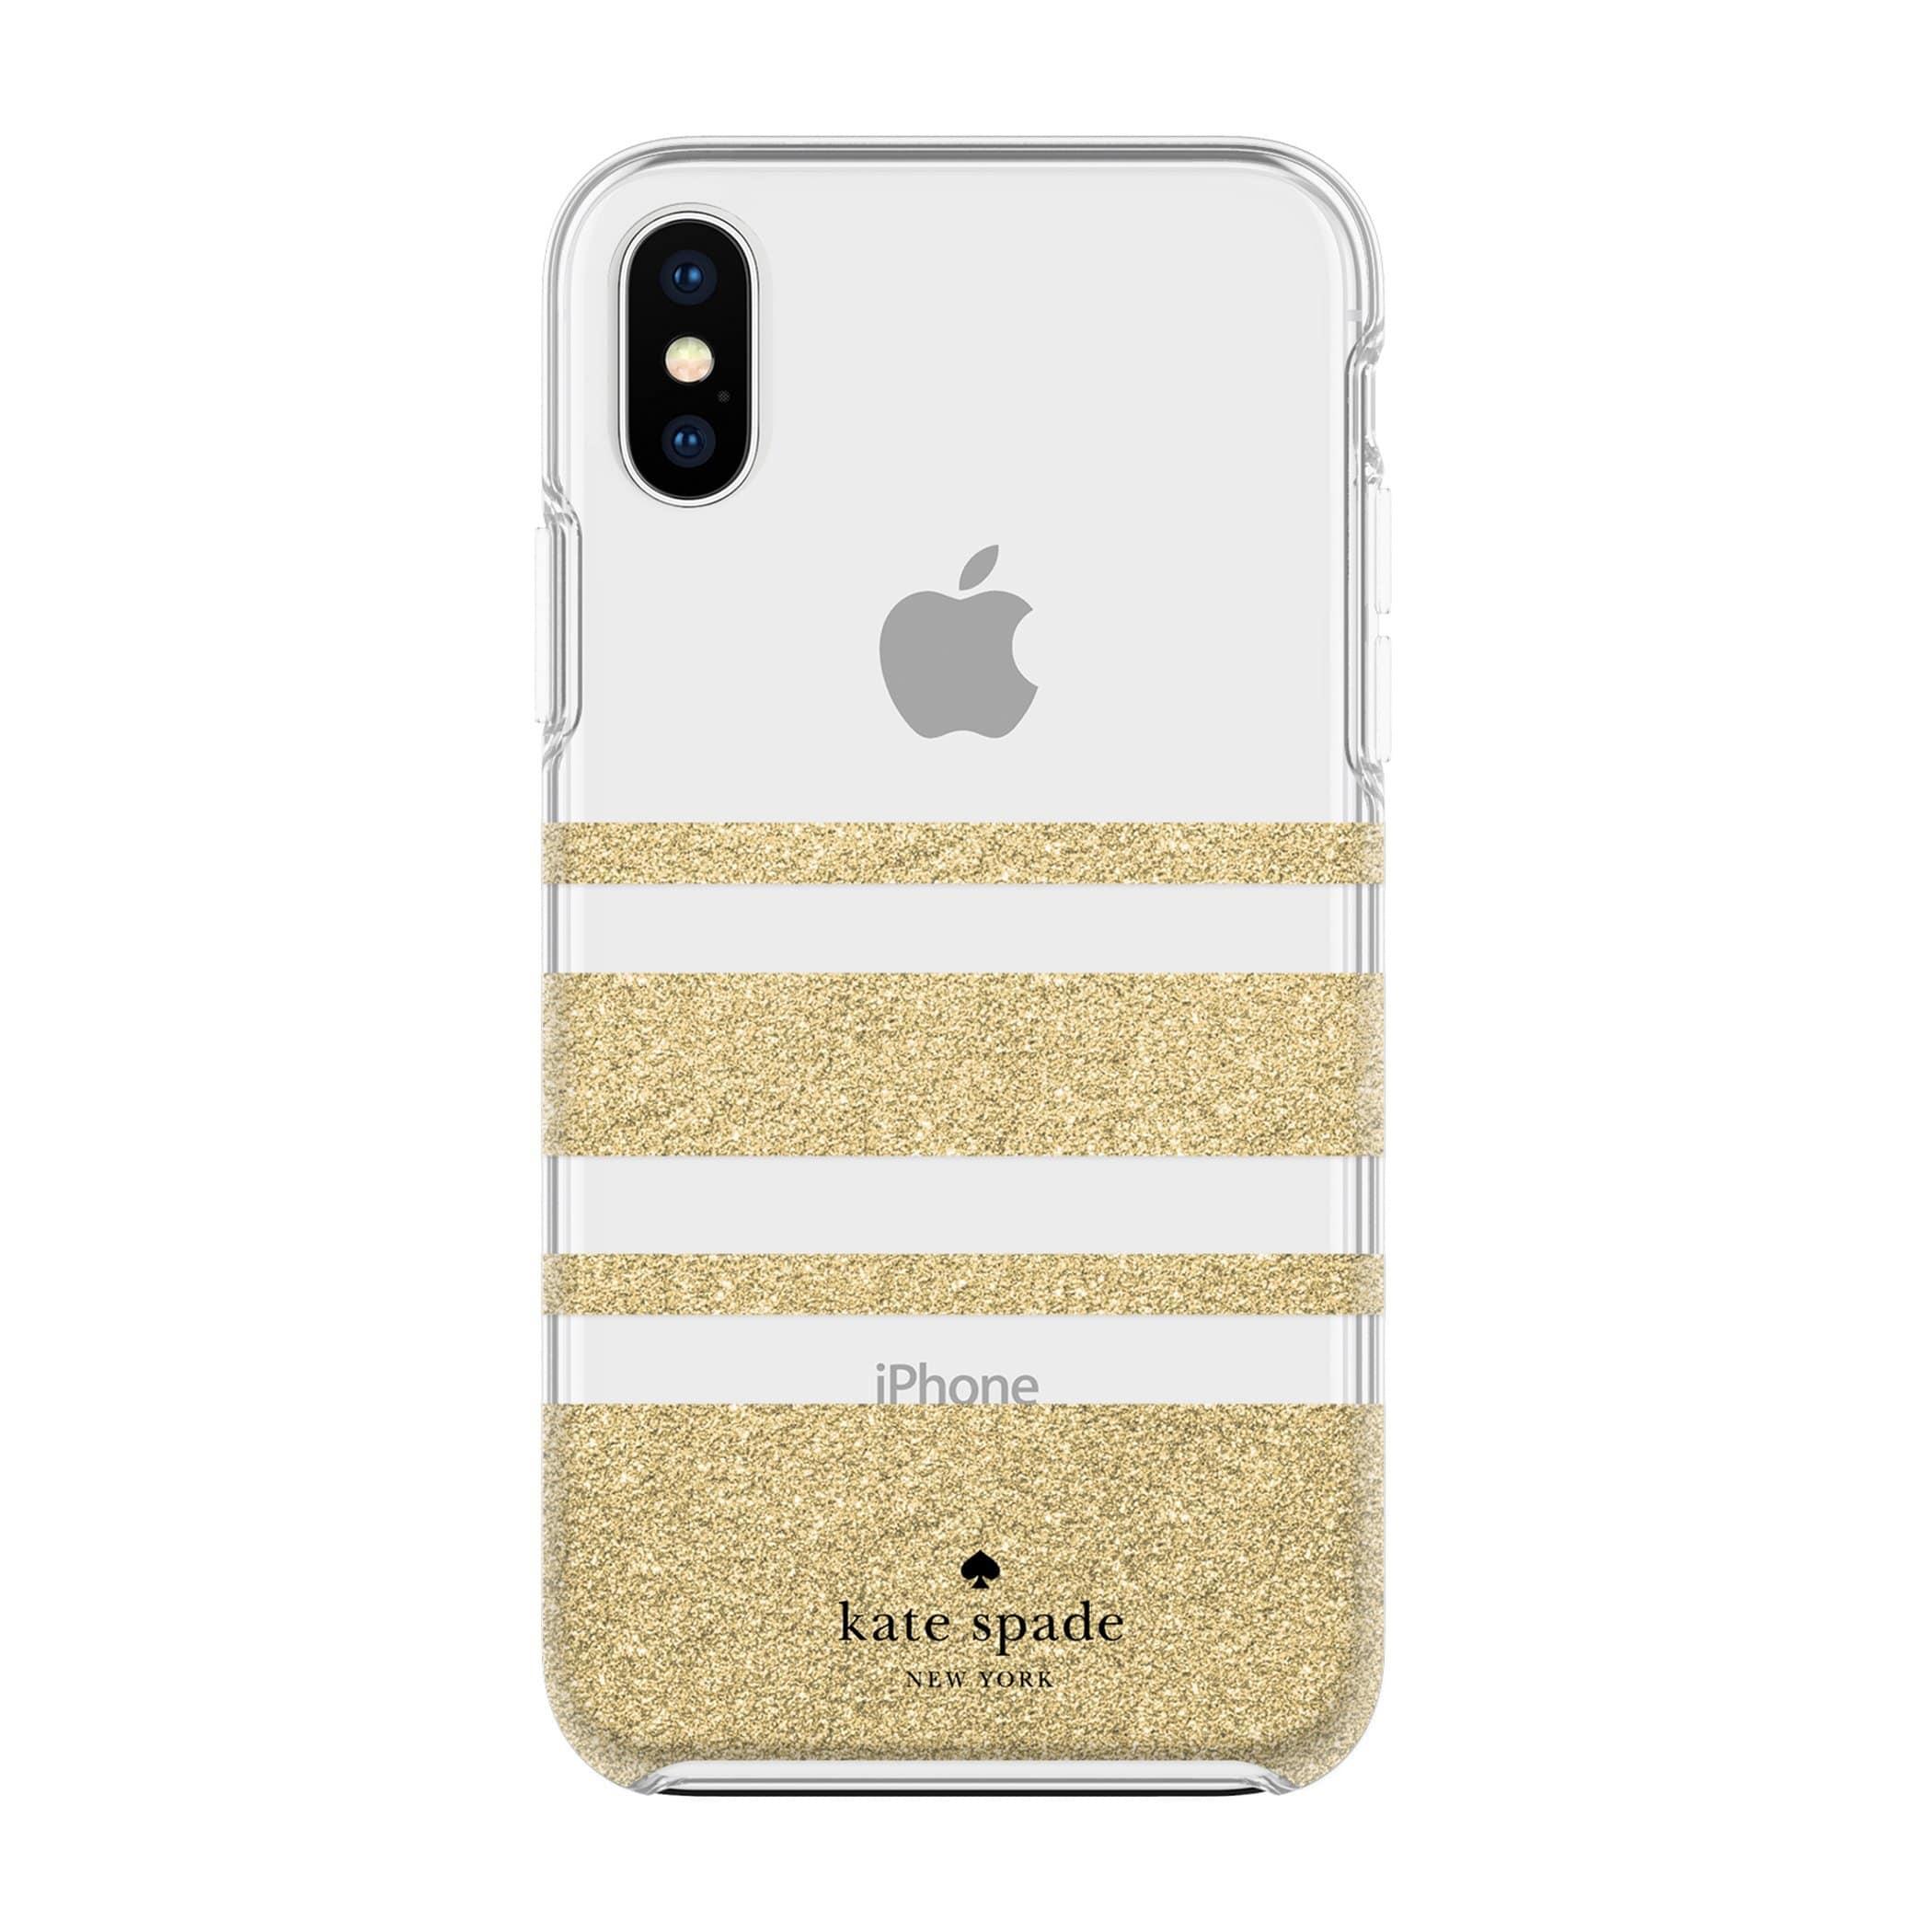 kate spade new york iphone xs x protective hardshell case charlotte stripe gold glitter clear